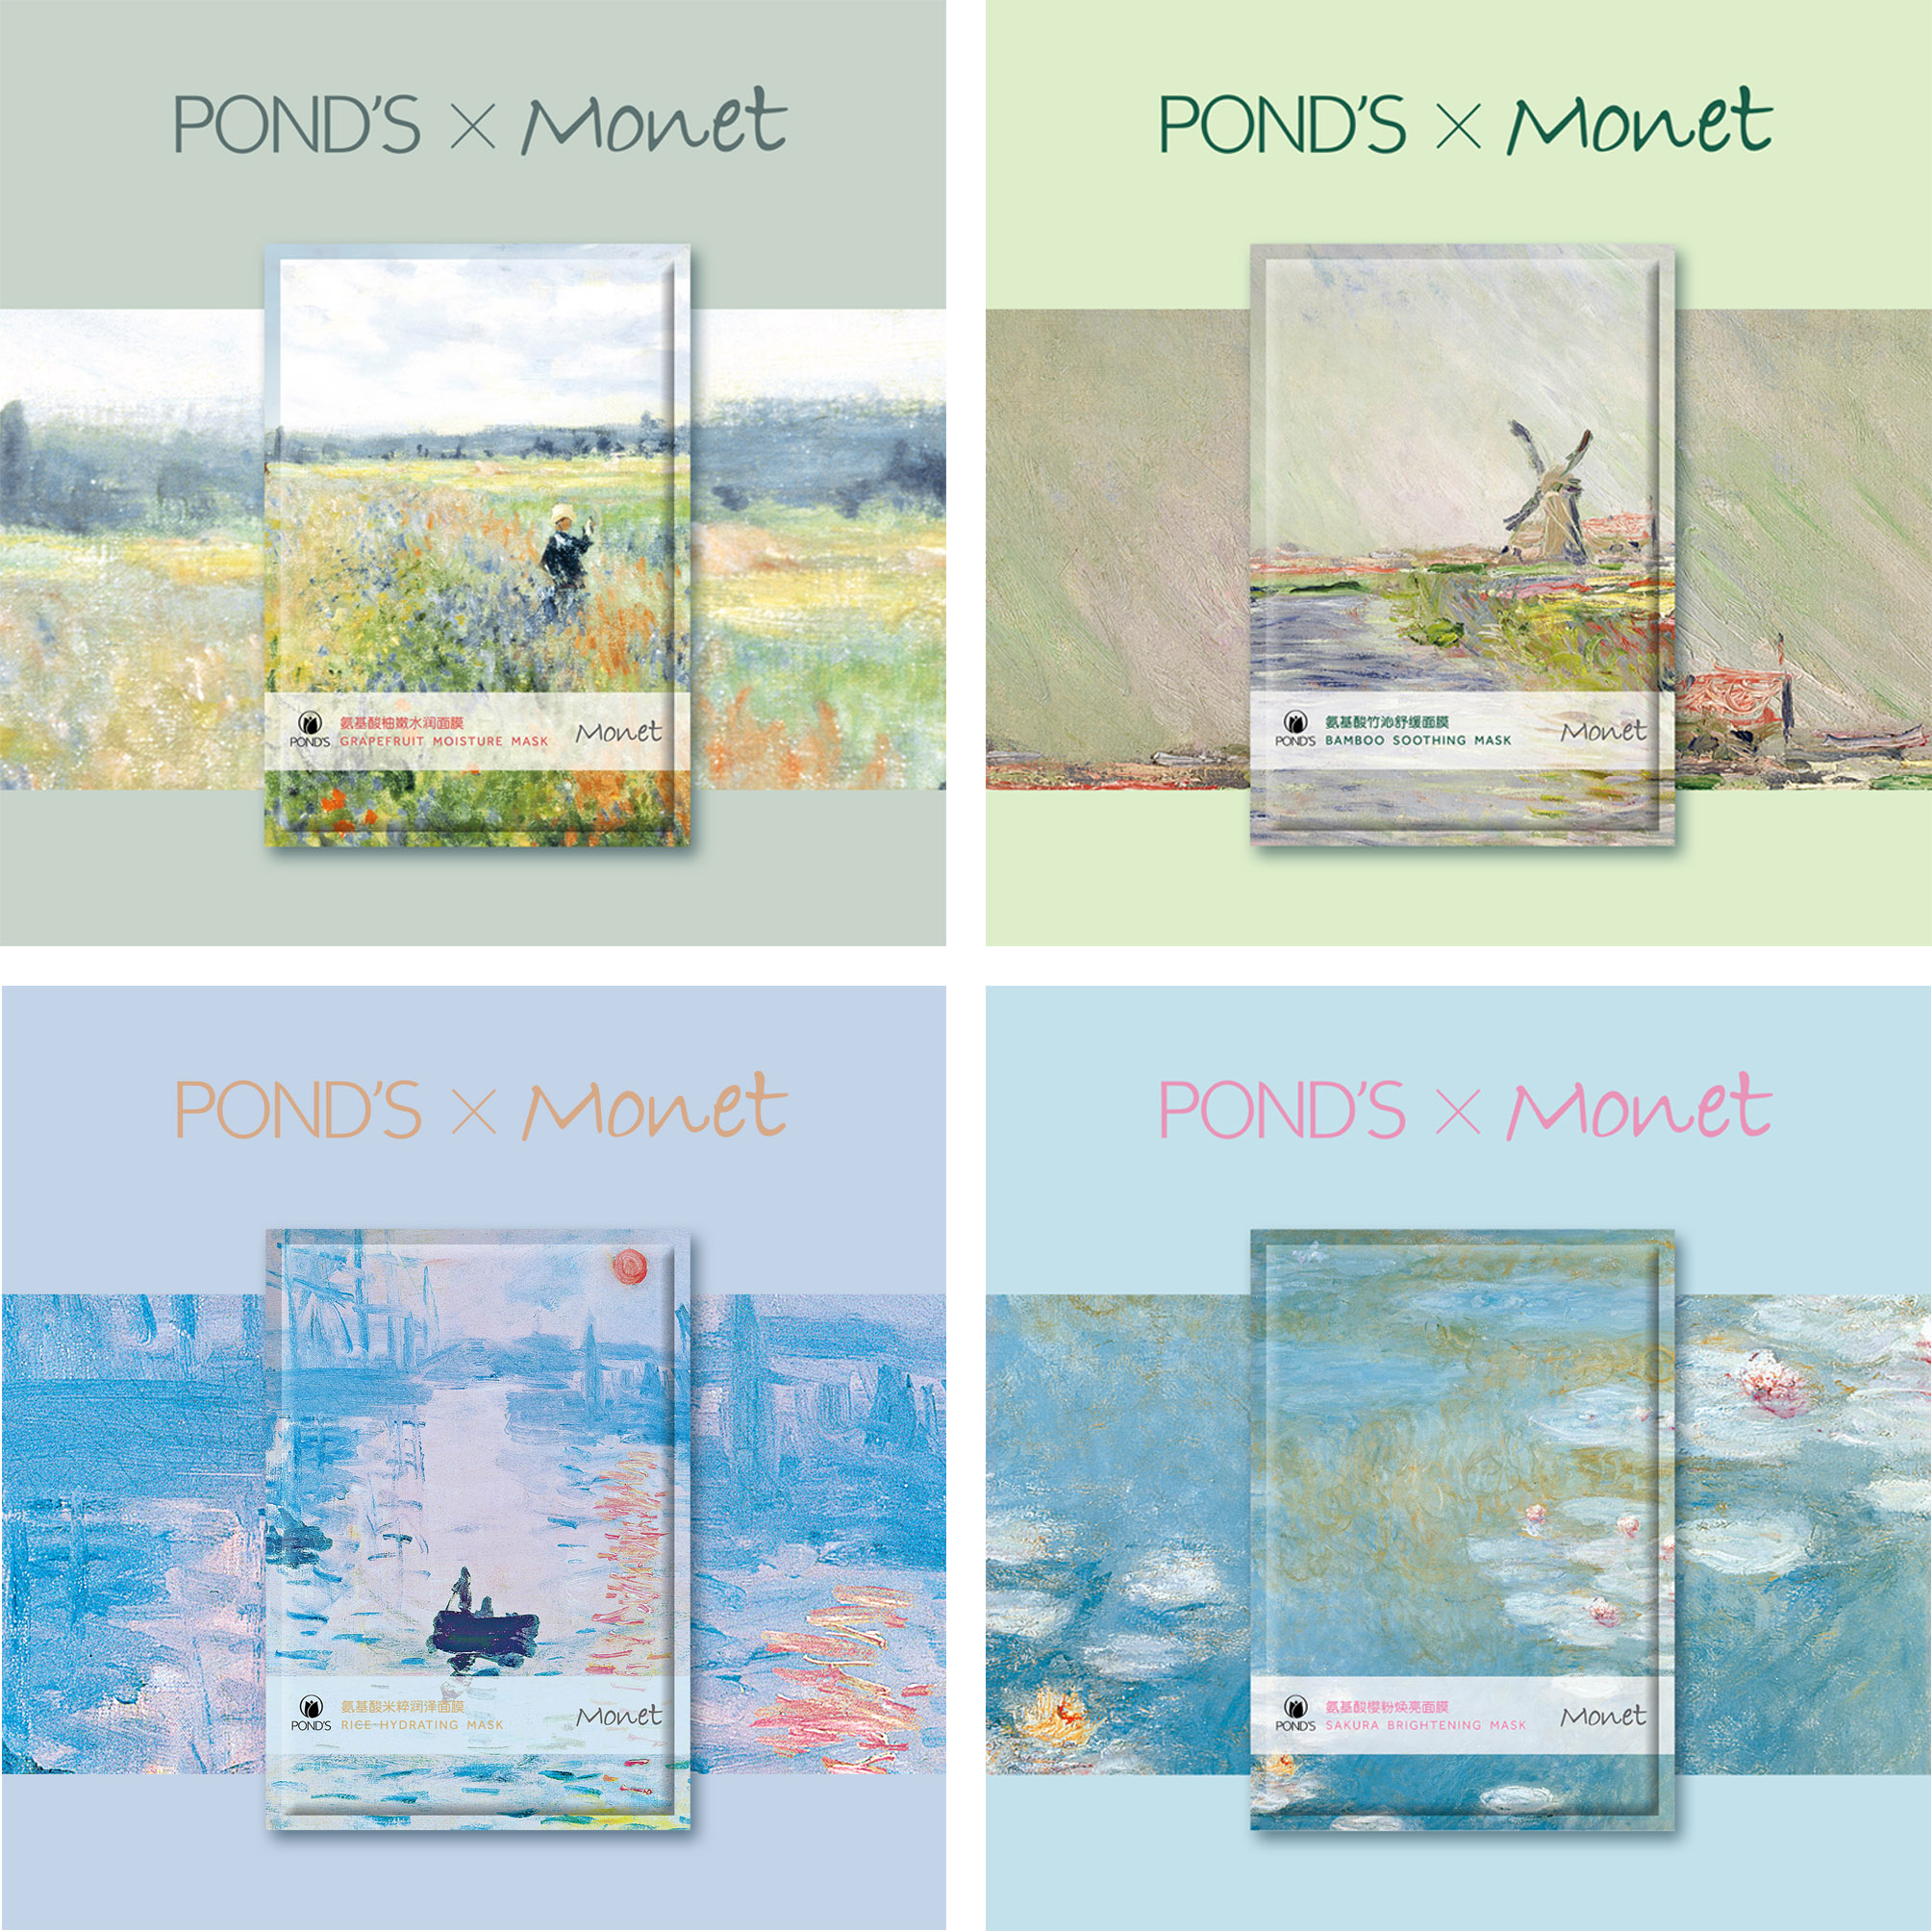 Image of Pond's face mask packaging using Bridgeman Images rights-Managed content